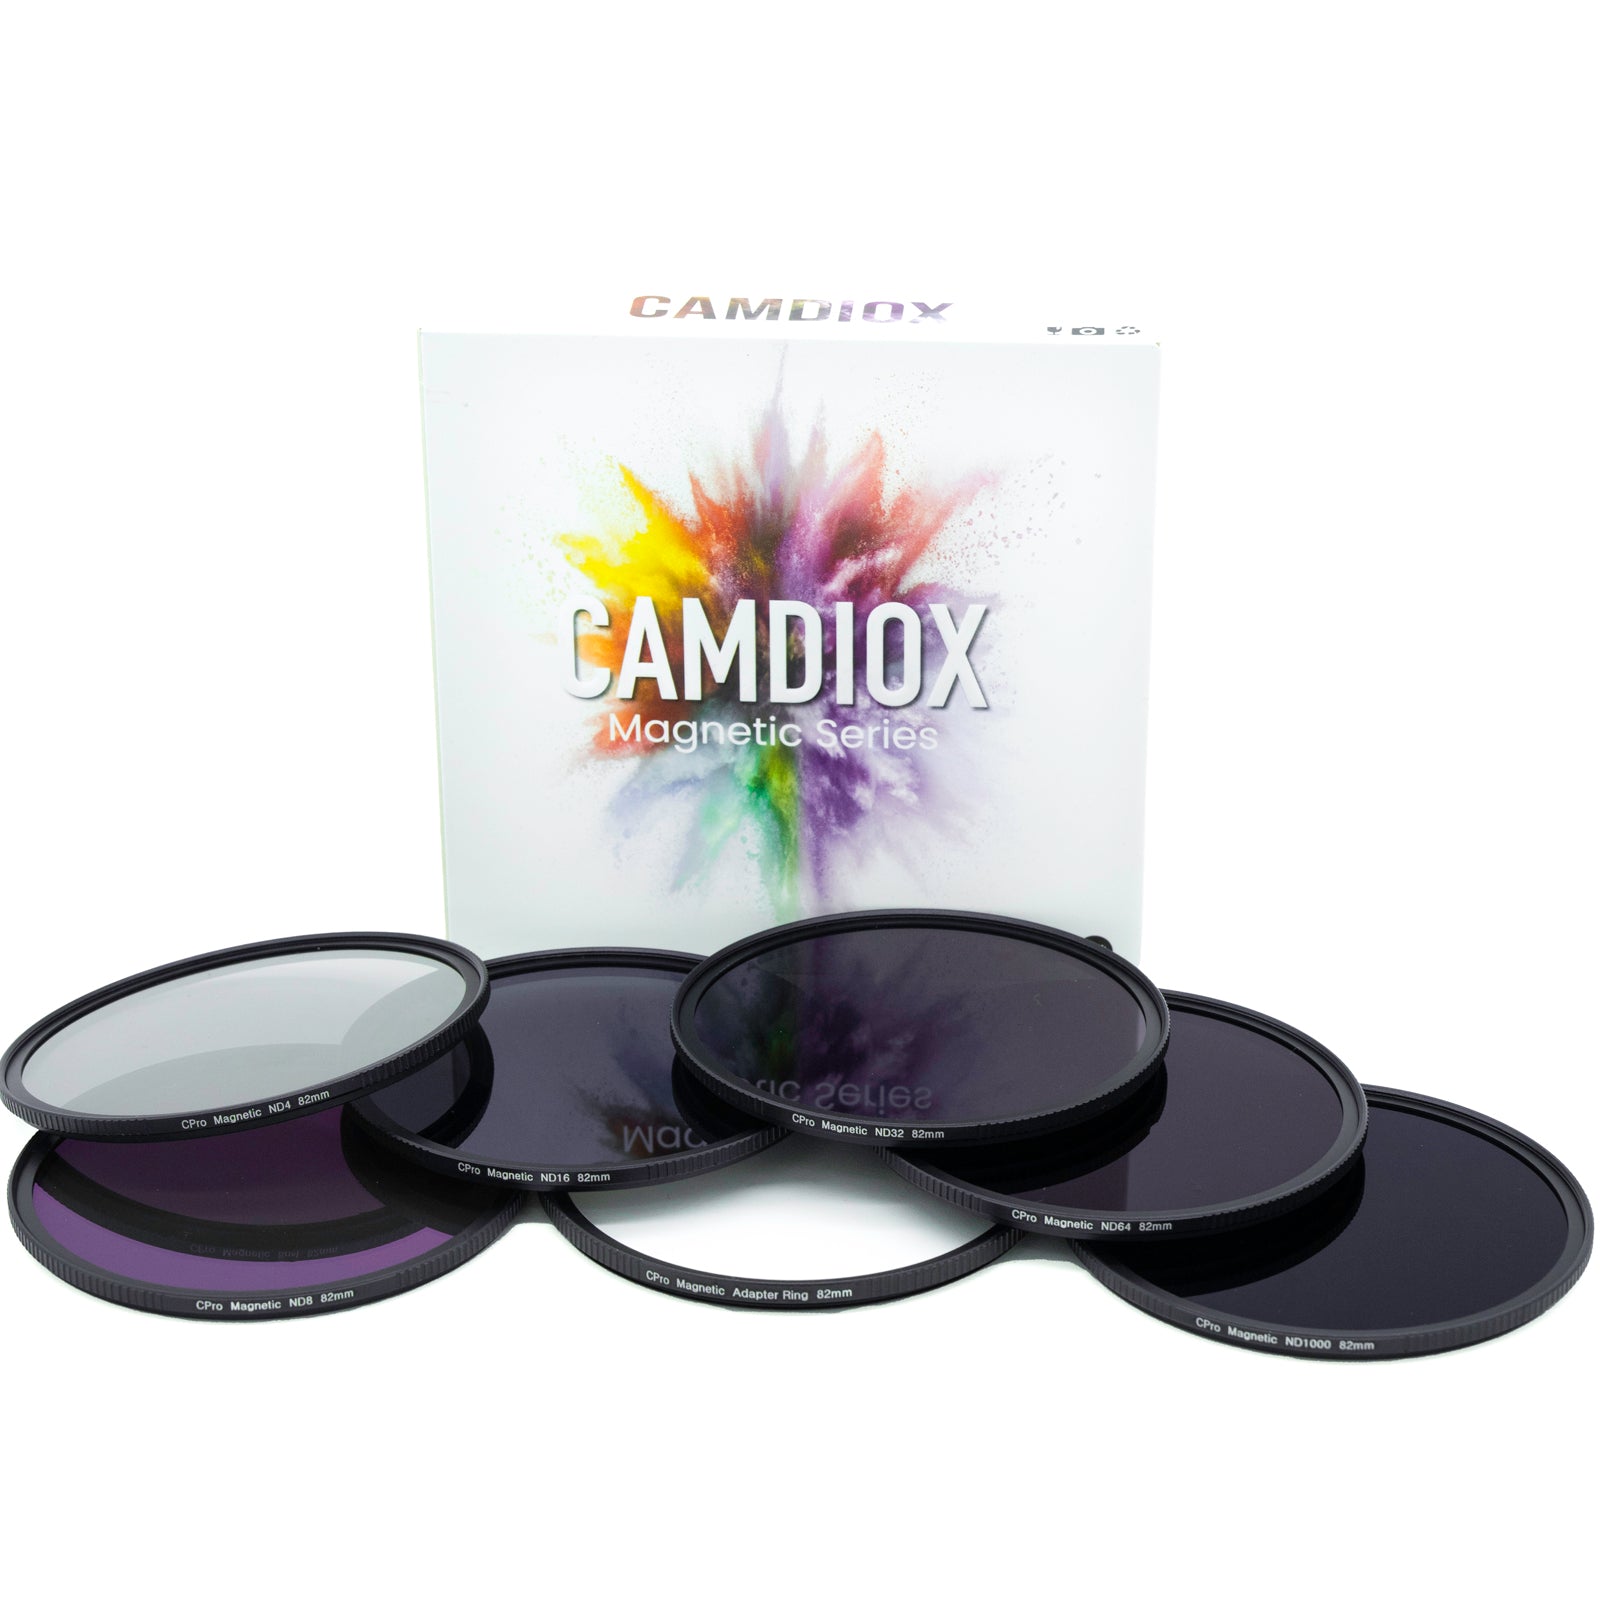 Camdiox CPRO Magnetic ND Neutral Density Filter - ND4 ND8 ND16 ND32 ND64 ND1000 - for Canon Nikon Sony Olympus Leica DSLR mirrorless camera lenses